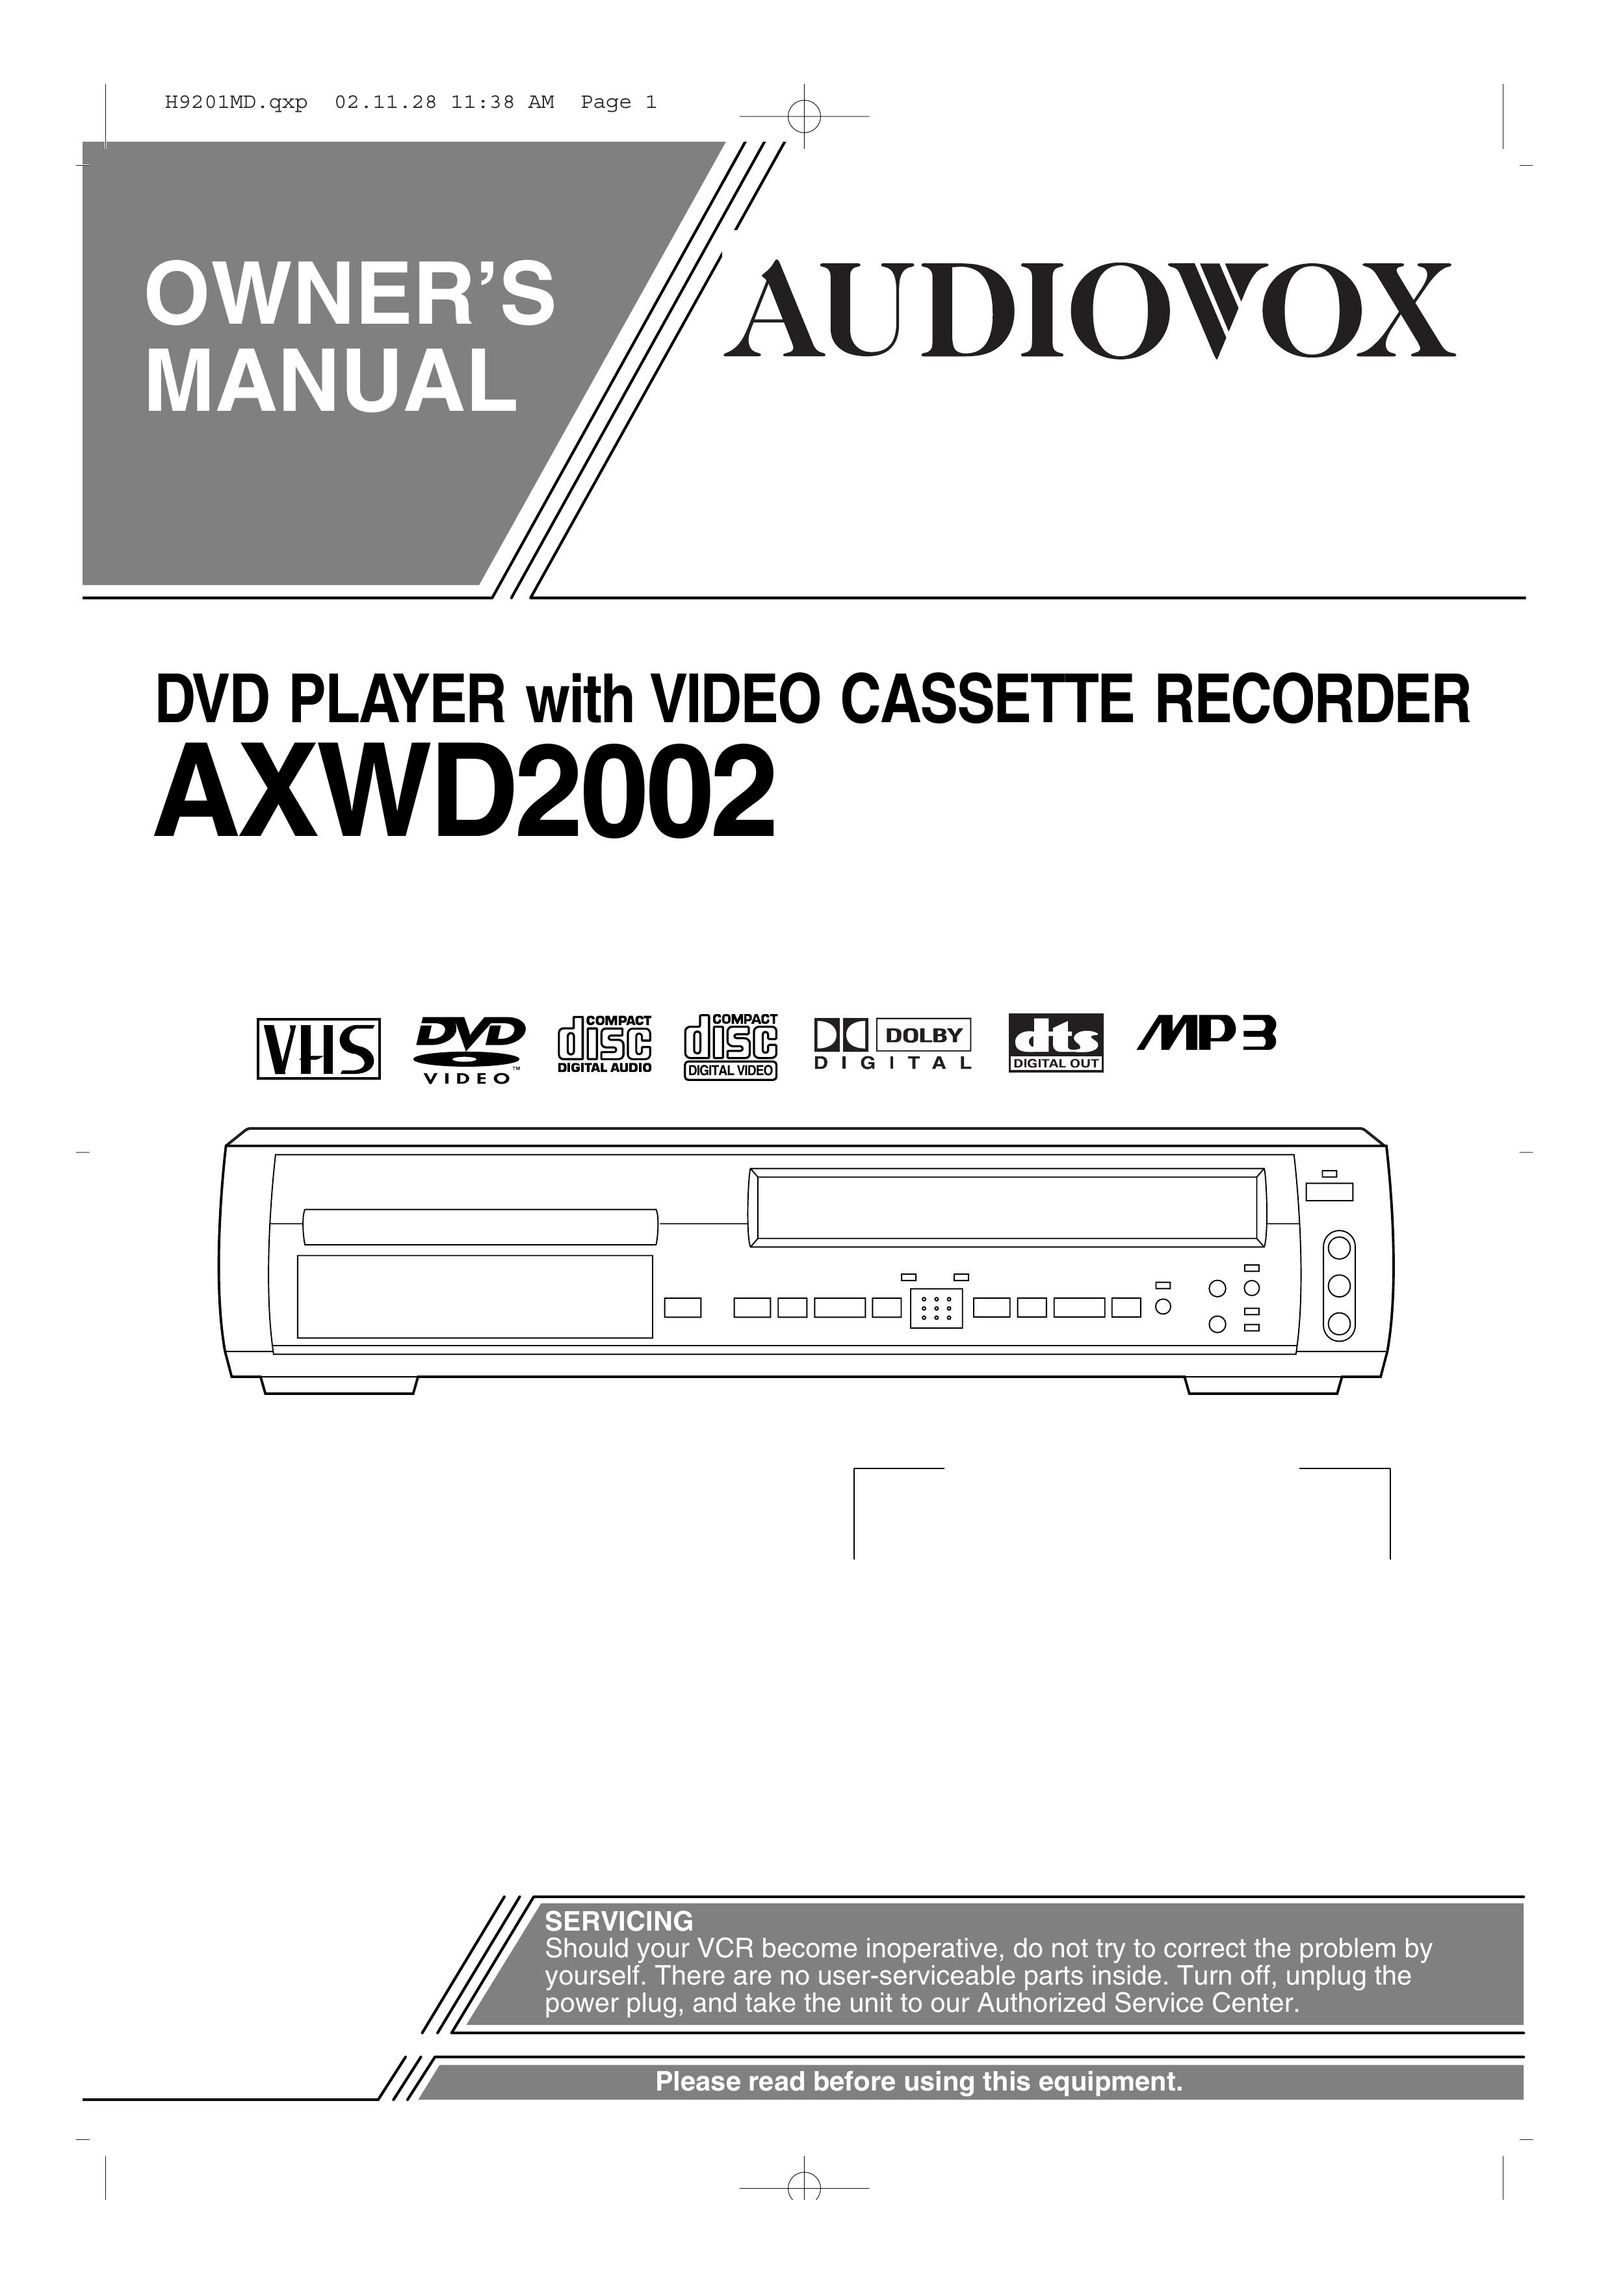 Audiovox AXWD2002 DVD VCR Combo User Manual